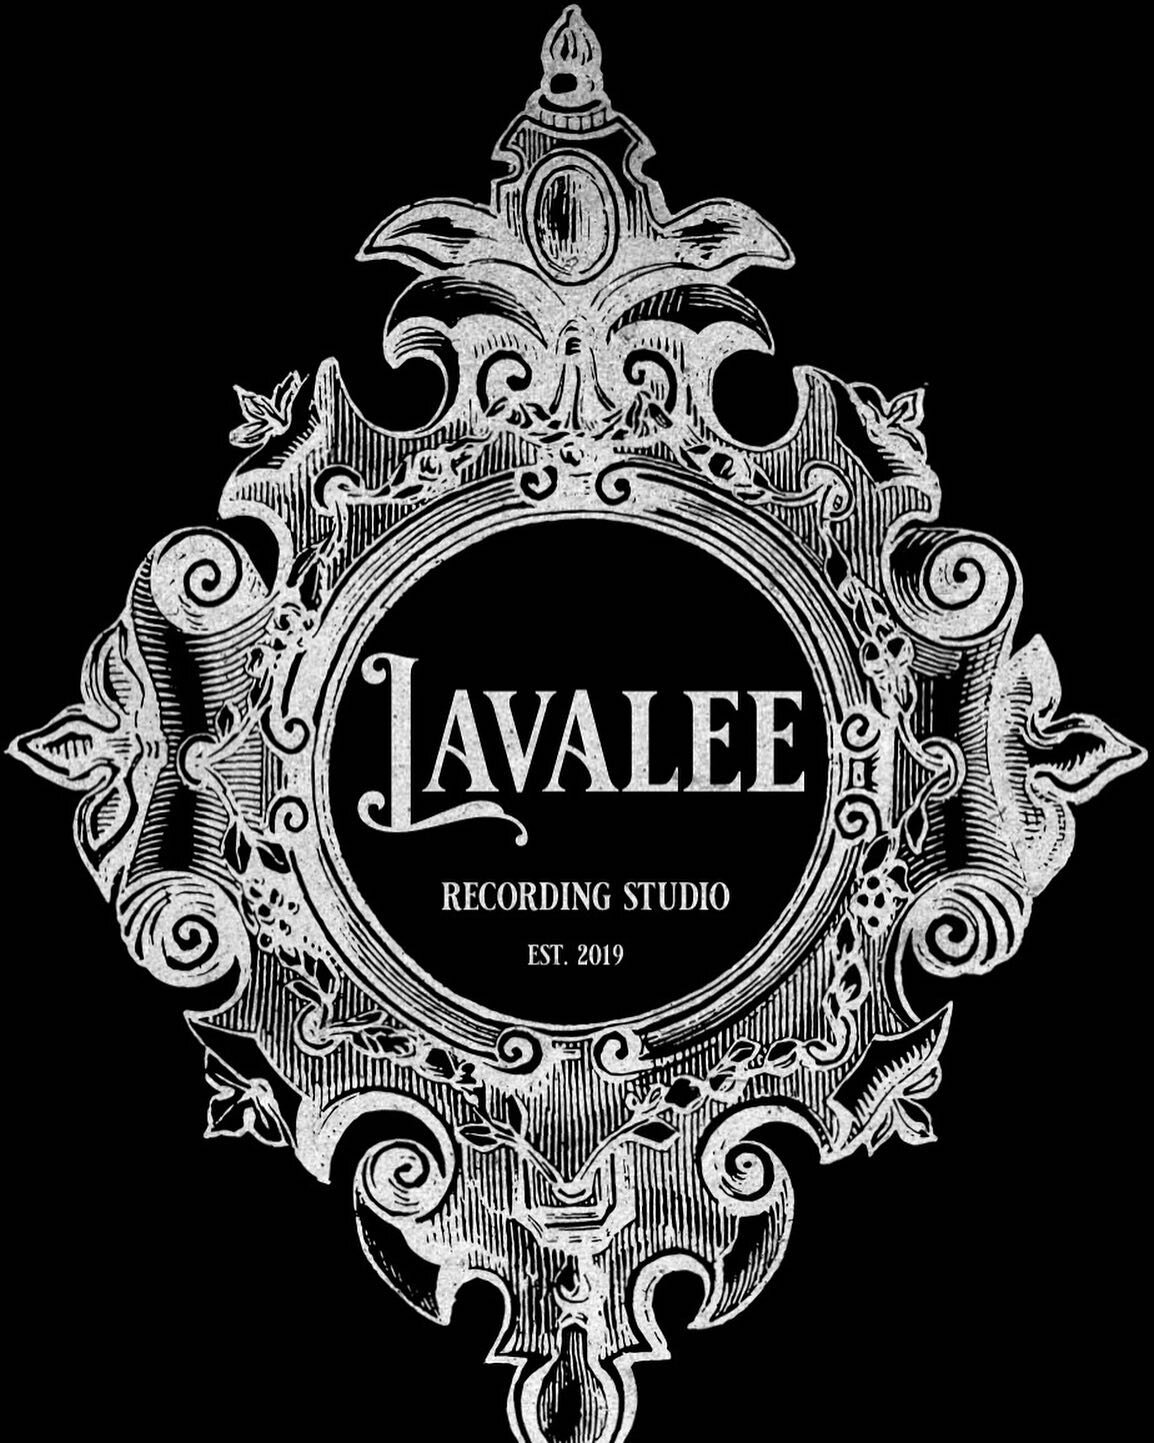 Making it official! @studiolavalee